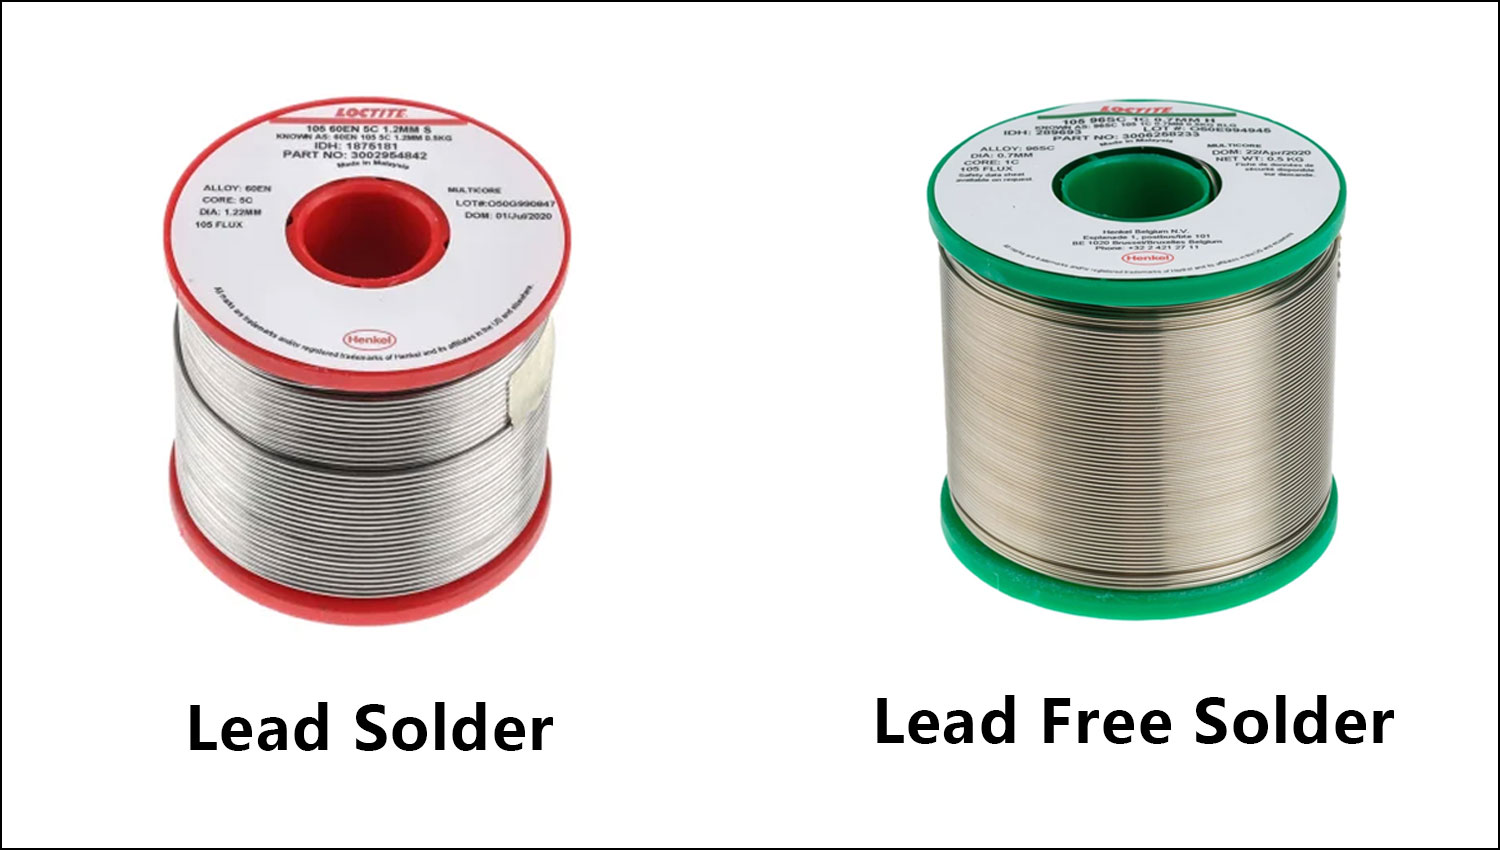 Lead solder and lead free solder